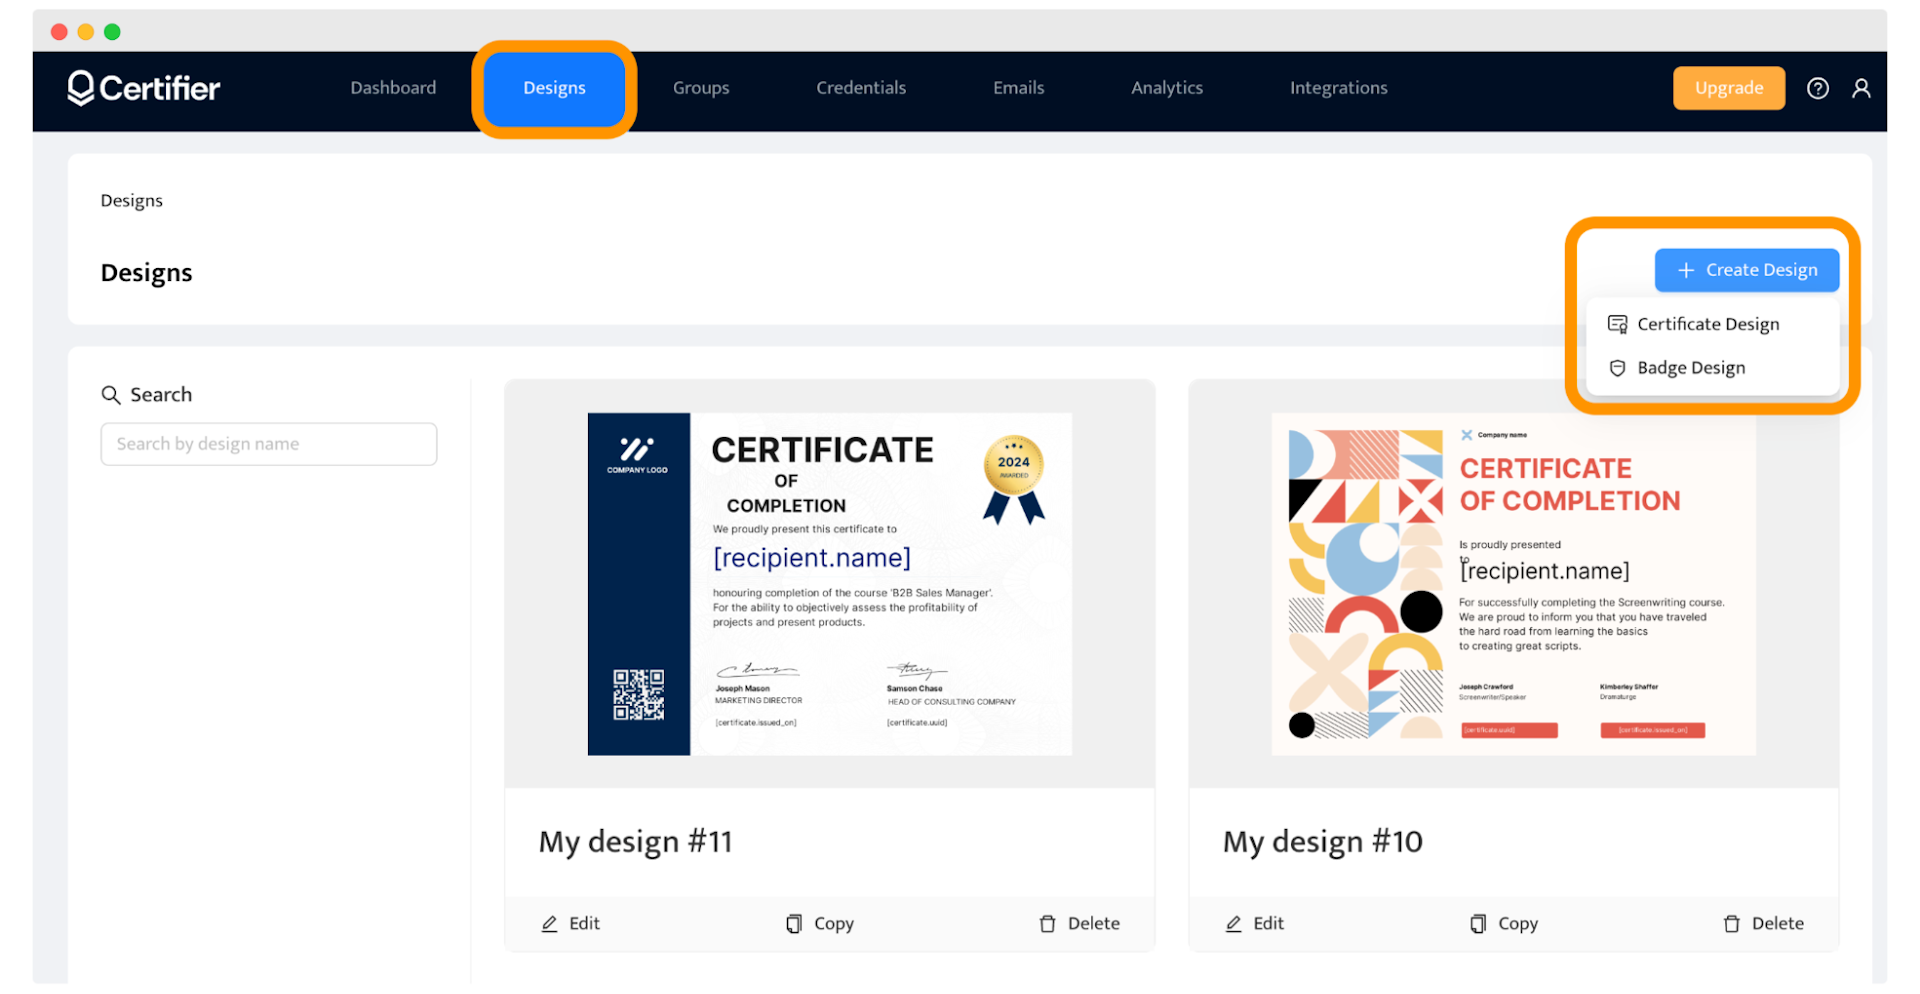 Steps to take to create new automated certification workflow with personalized certificate.